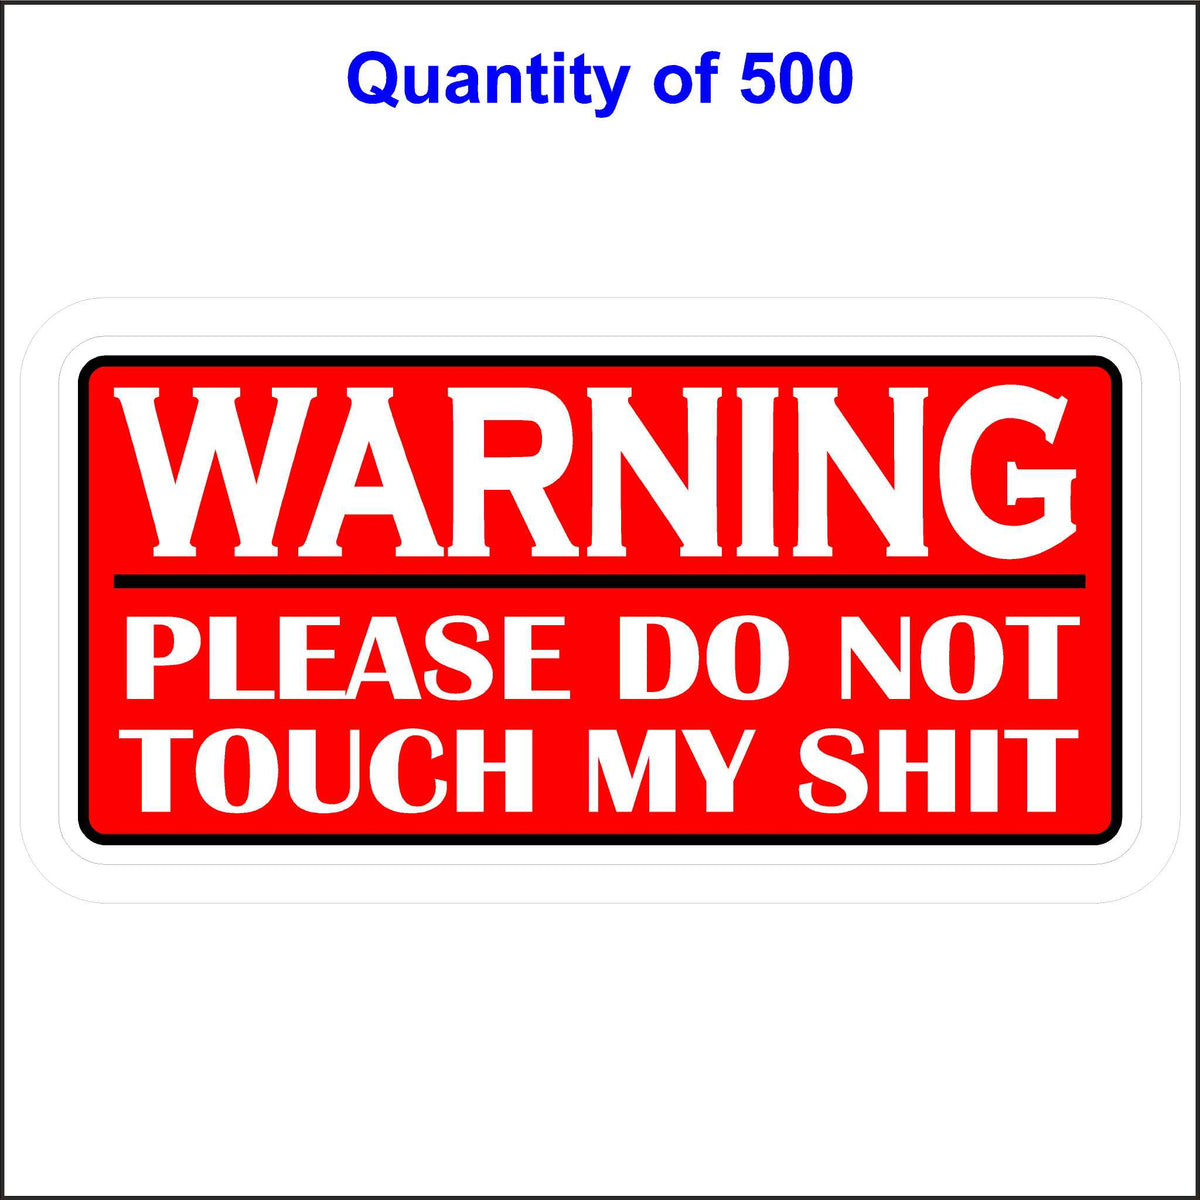 Warning Please Do Not Touch My Shit Sticker With a Red Background and White Lettering. 500 Quantity.